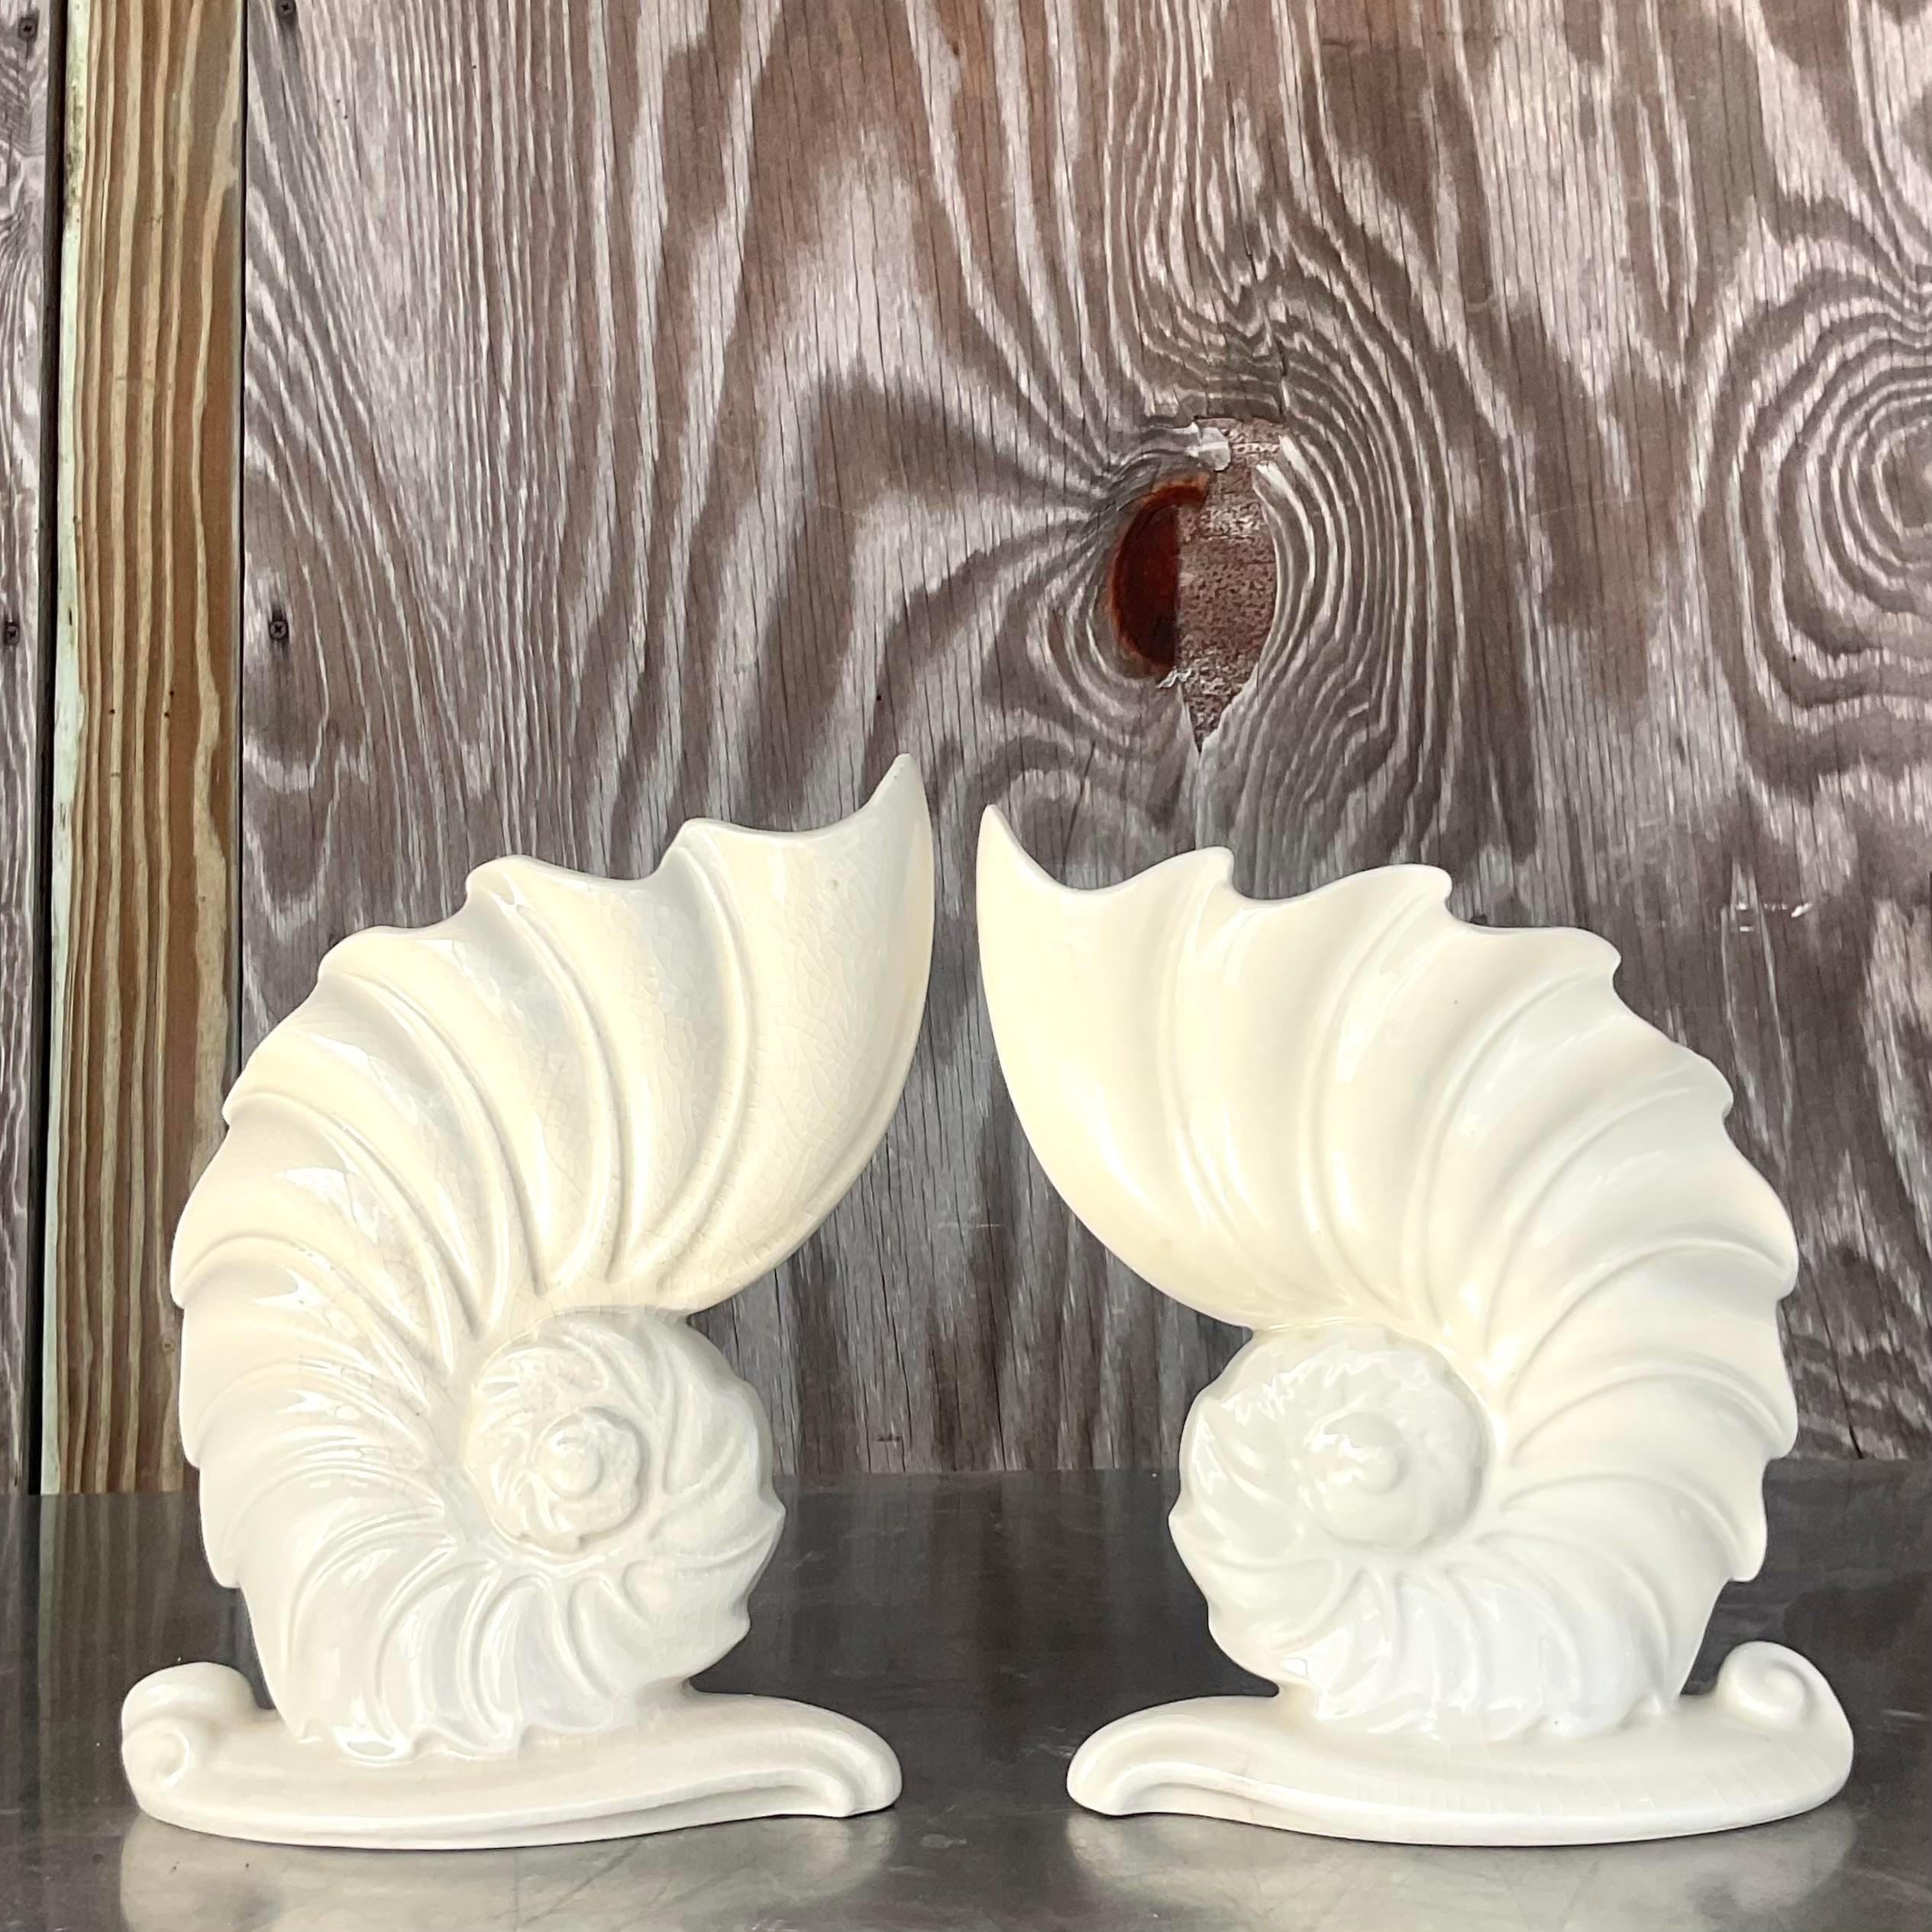 North American Vintage Coastal Abstract Nautilus Shell Glazed Ceramic Vases - a Pair For Sale